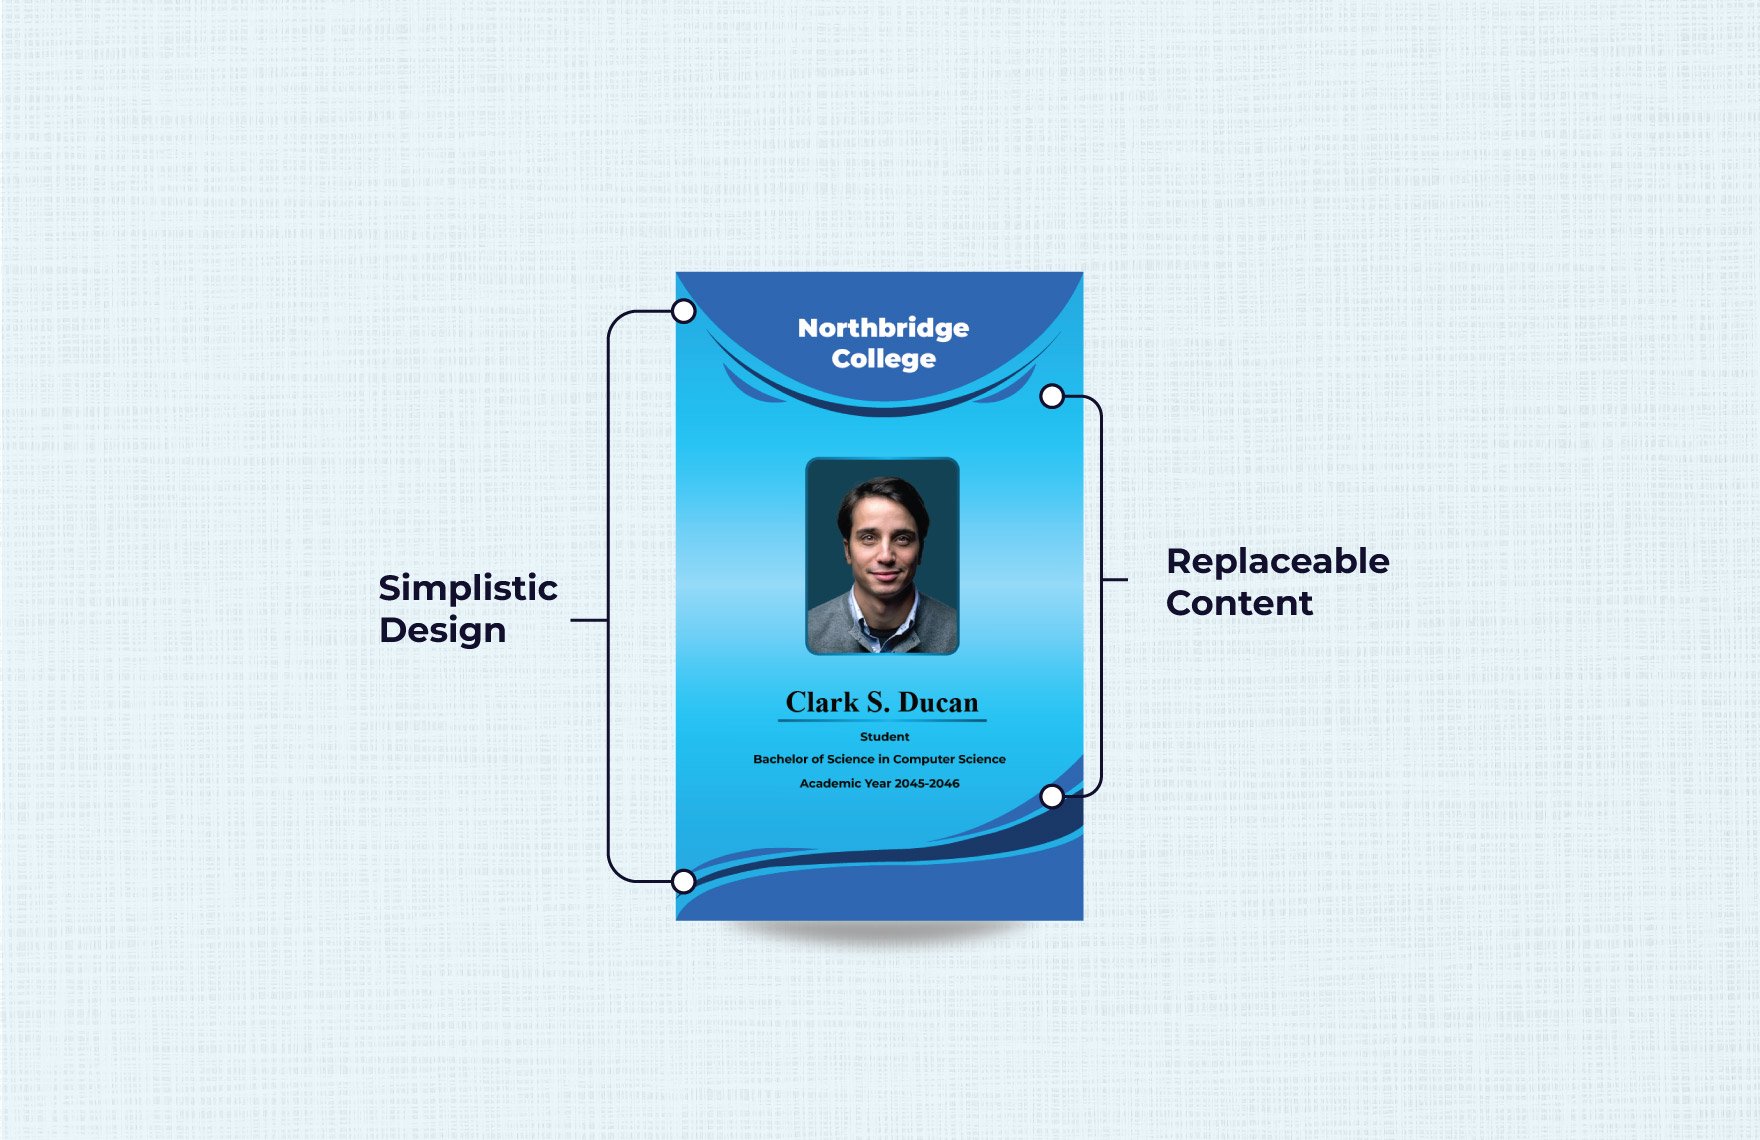 College ID Card Template